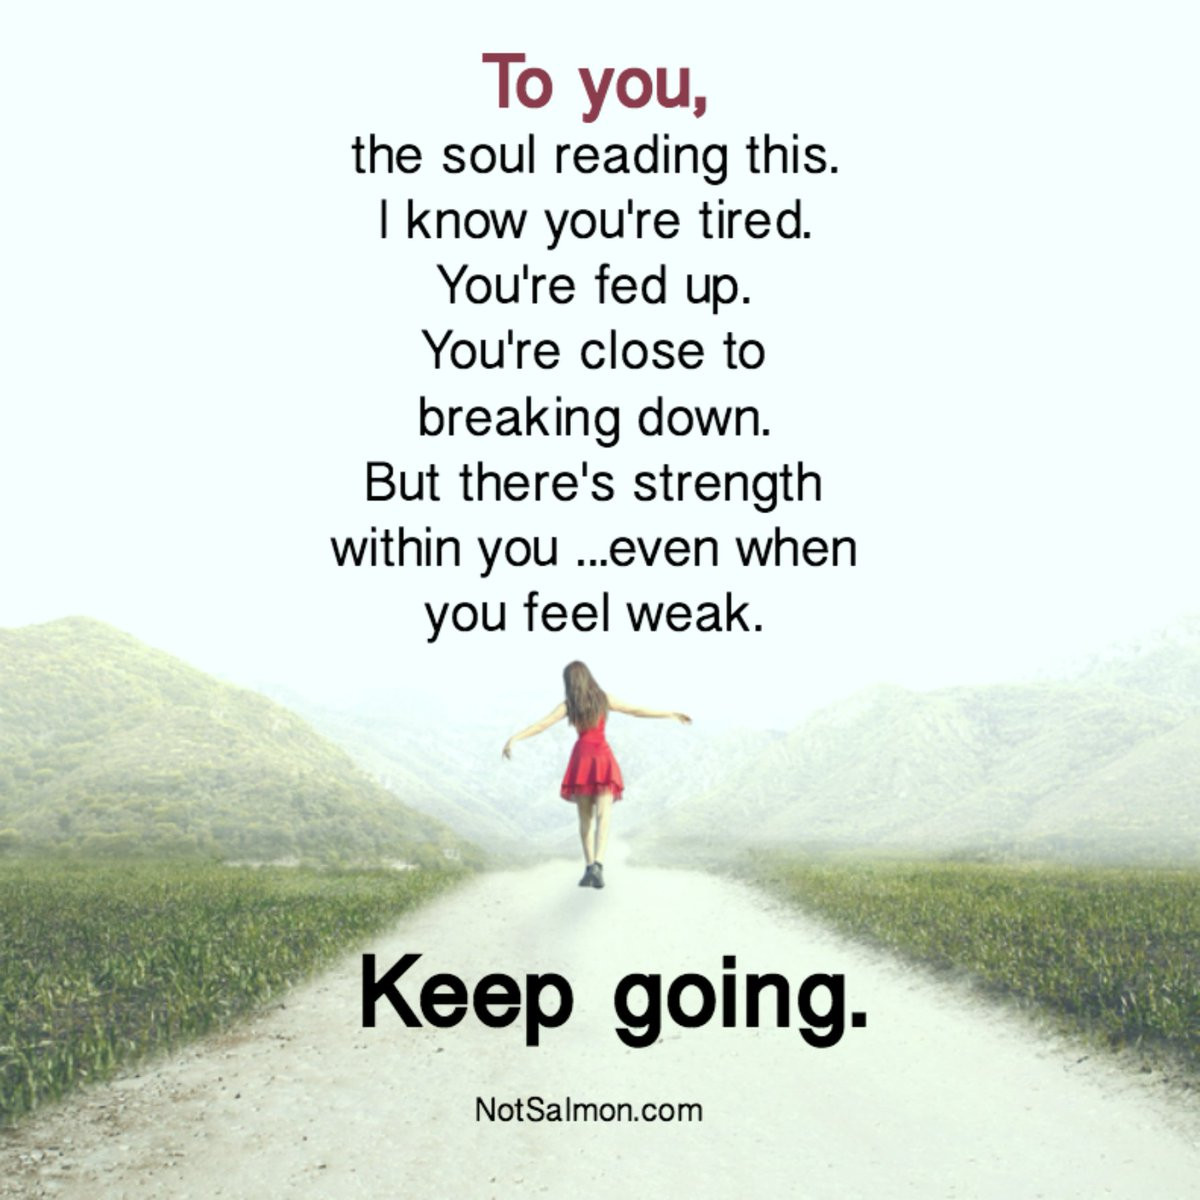 Motivational Quotes To Keep Going
 Keep going keep going keep going motivation